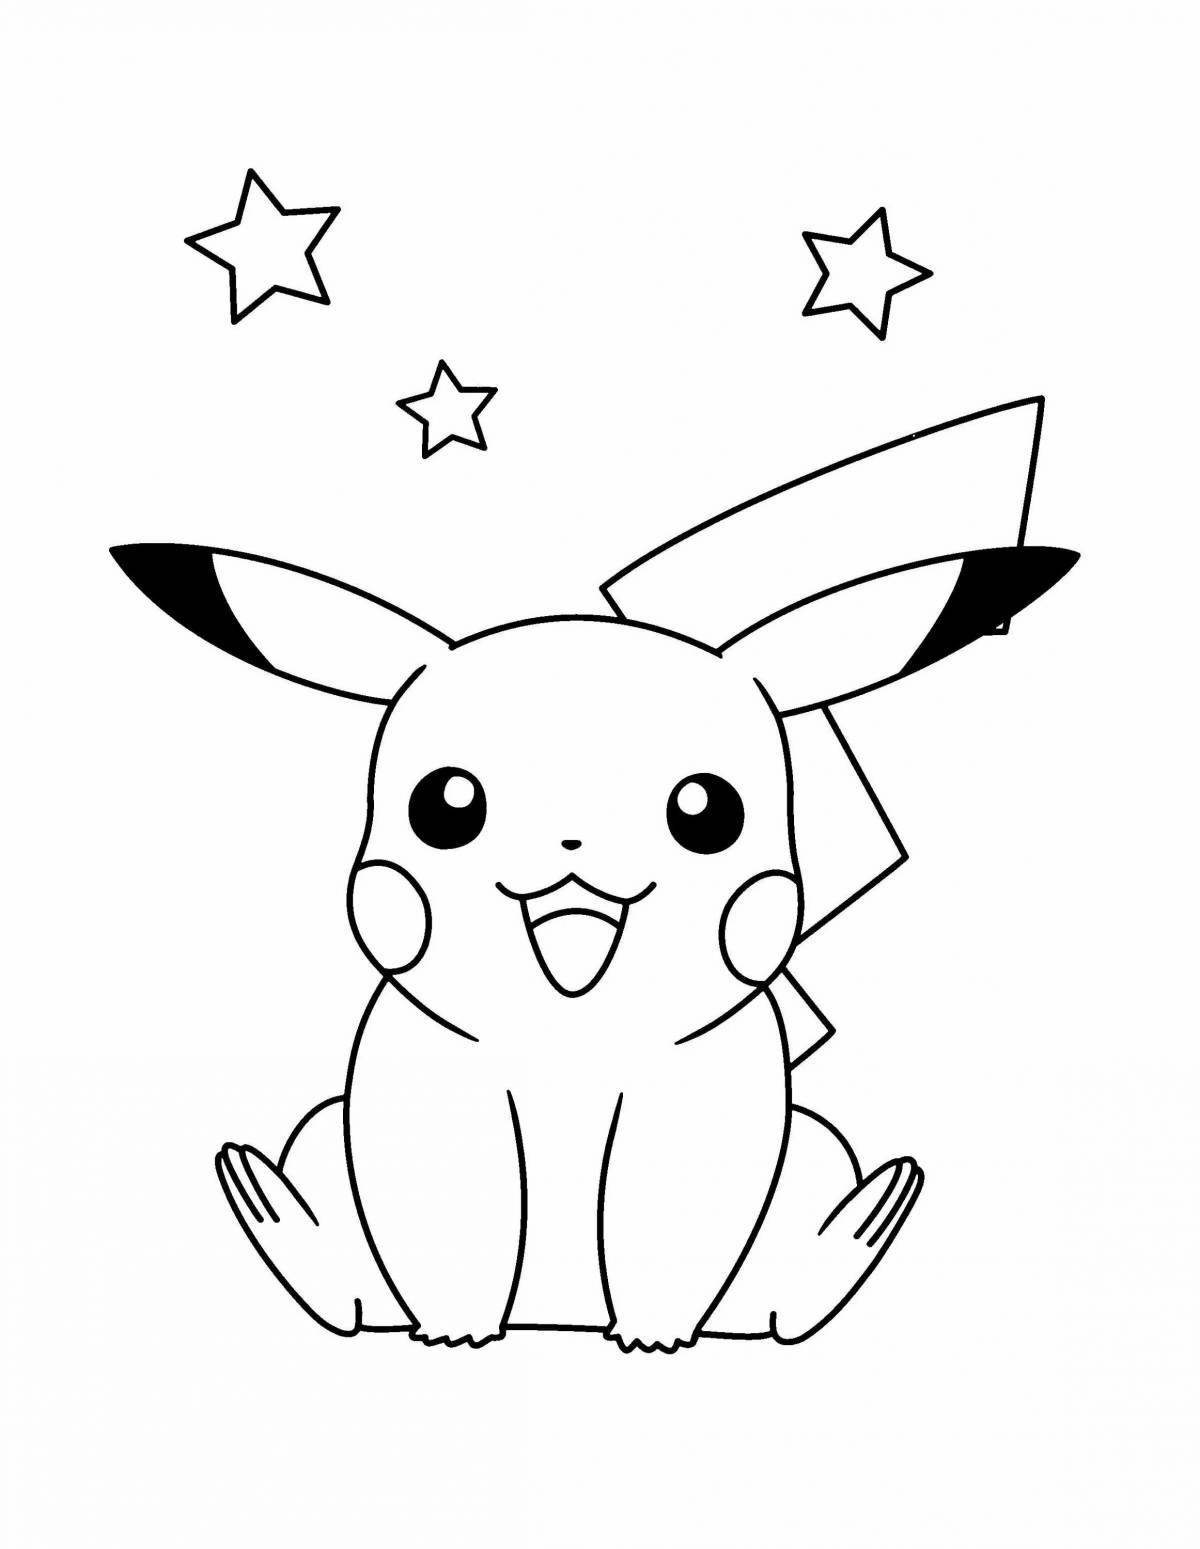 Vibrant pikachu coloring page